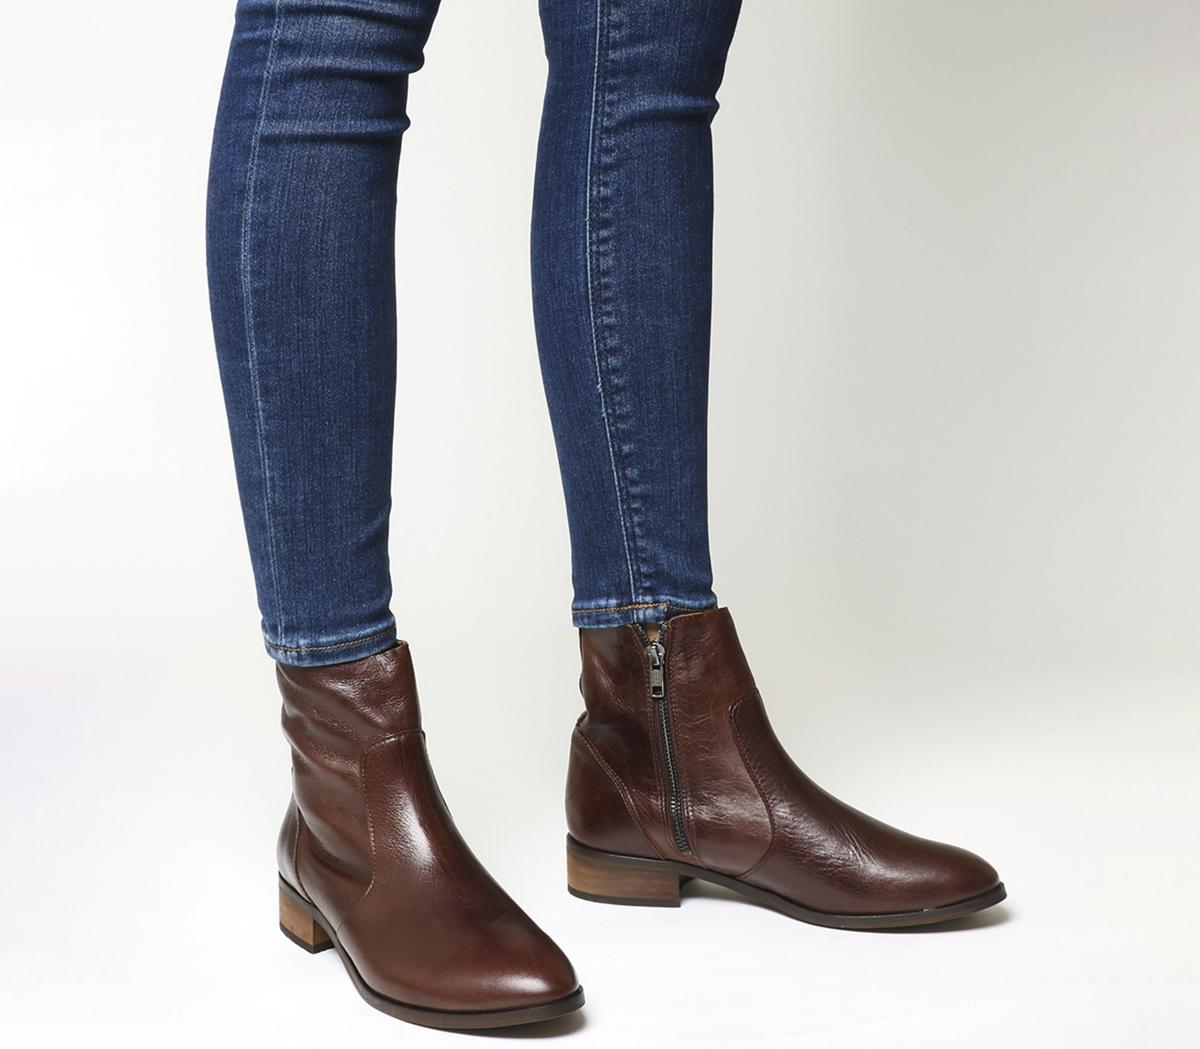 OFFICEAshleigh Flat Ankle BootsBrown Leather